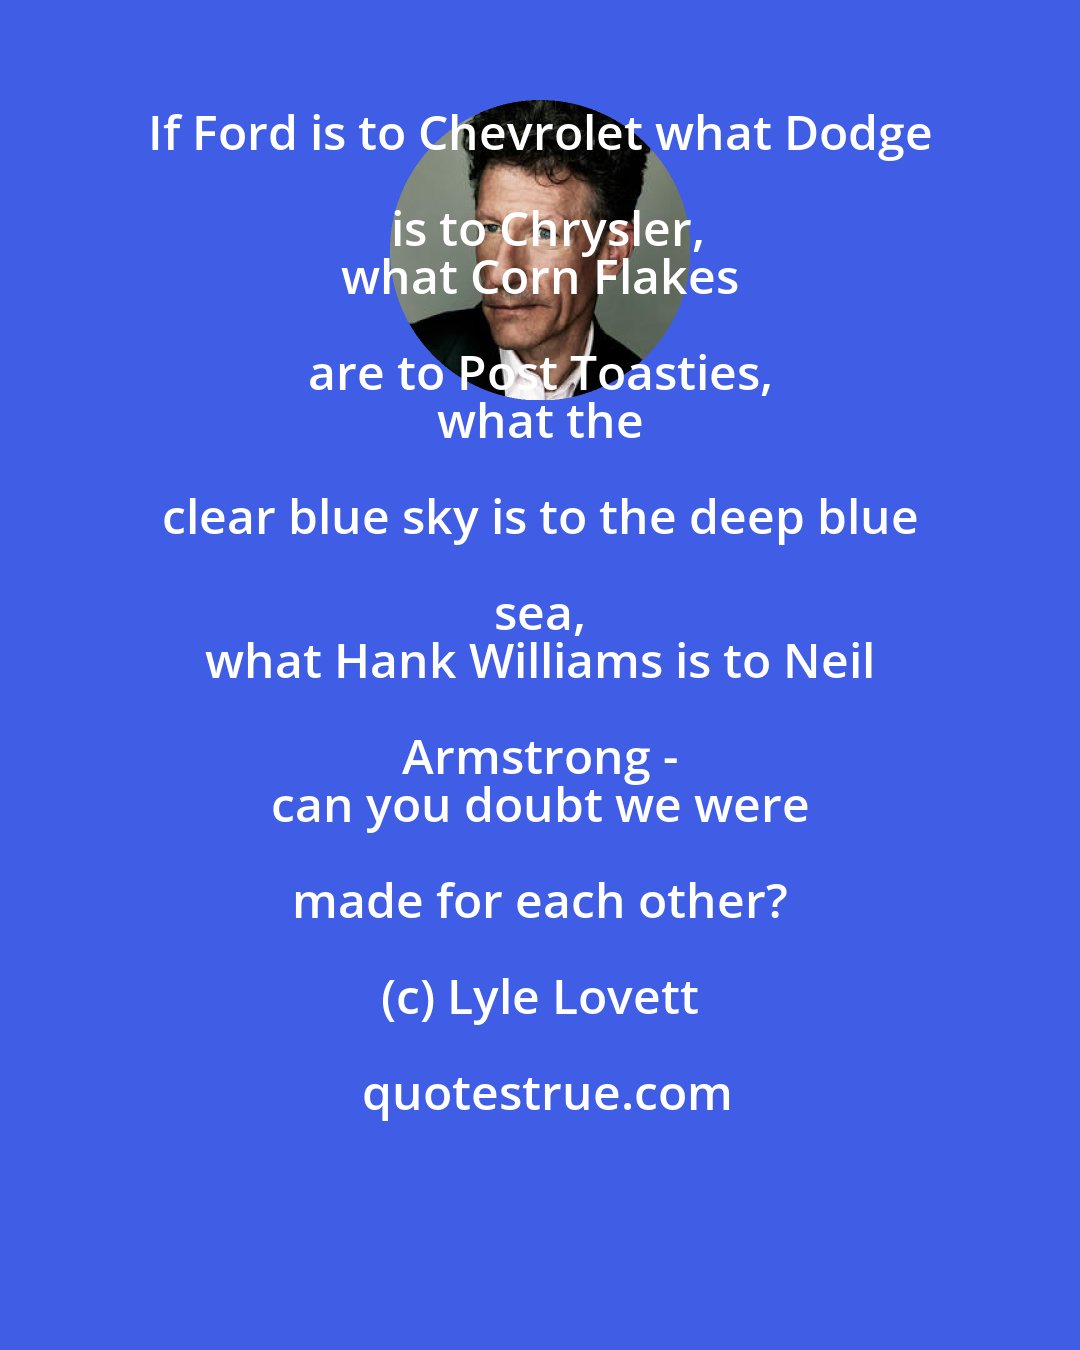 Lyle Lovett: If Ford is to Chevrolet what Dodge is to Chrysler,
 what Corn Flakes are to Post Toasties, 
 what the clear blue sky is to the deep blue sea, 
 what Hank Williams is to Neil Armstrong - 
 can you doubt we were made for each other?